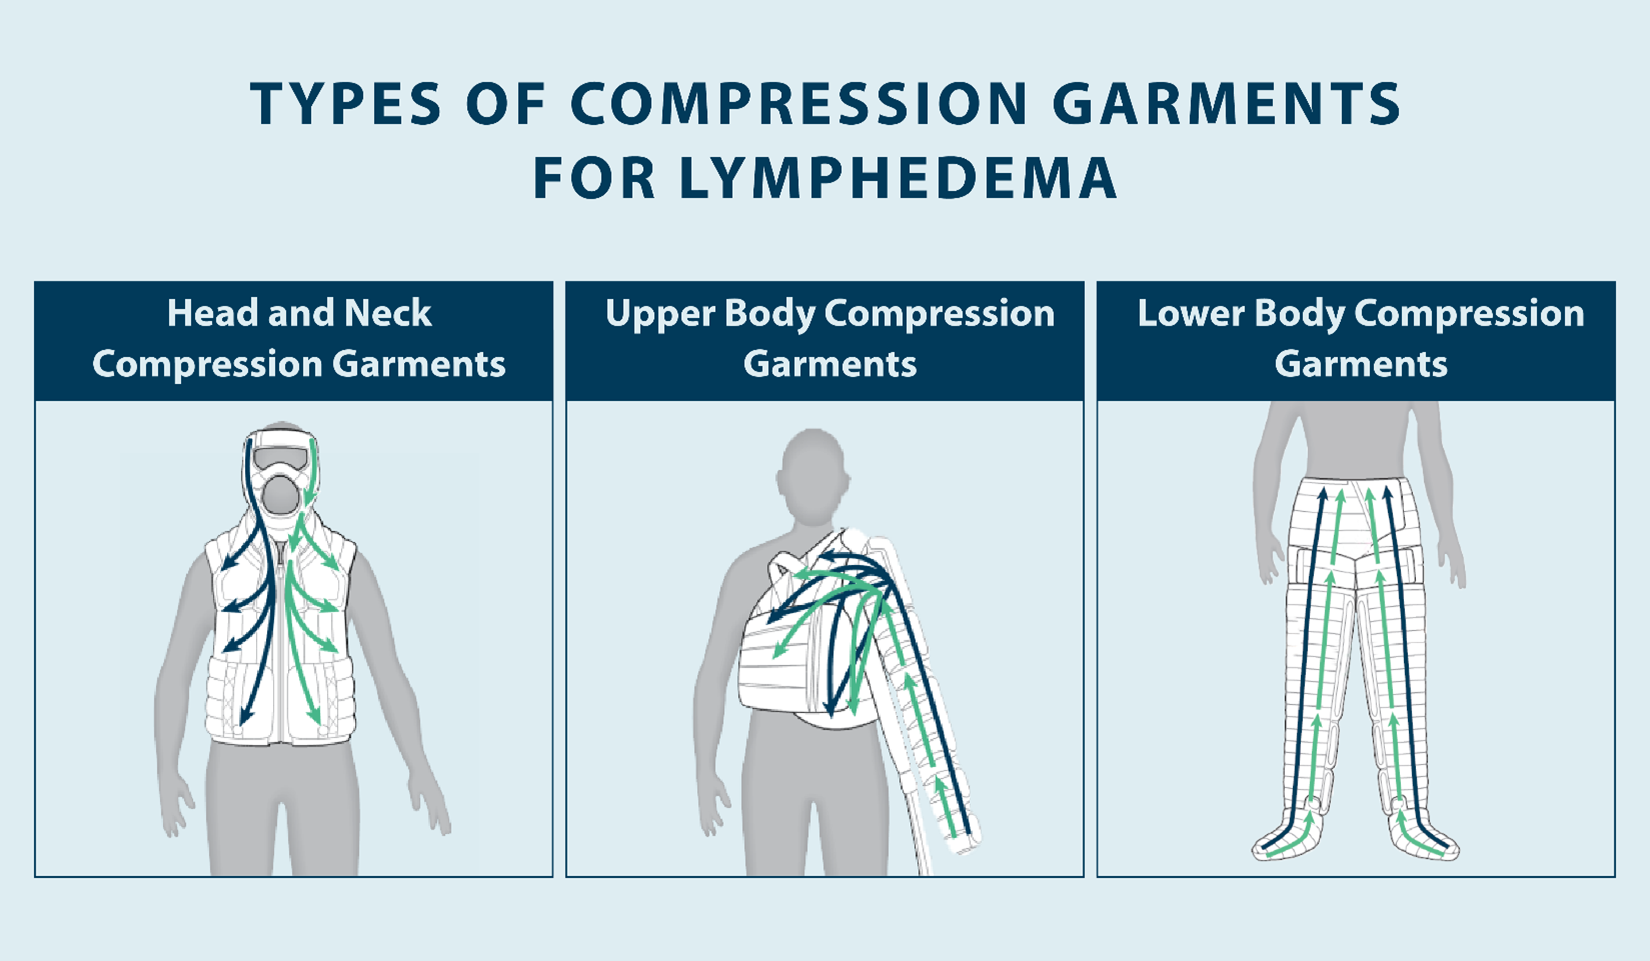 types of compression garments for lymphedema: head and neck compression garments, upper body compression garments, lower body compression garments